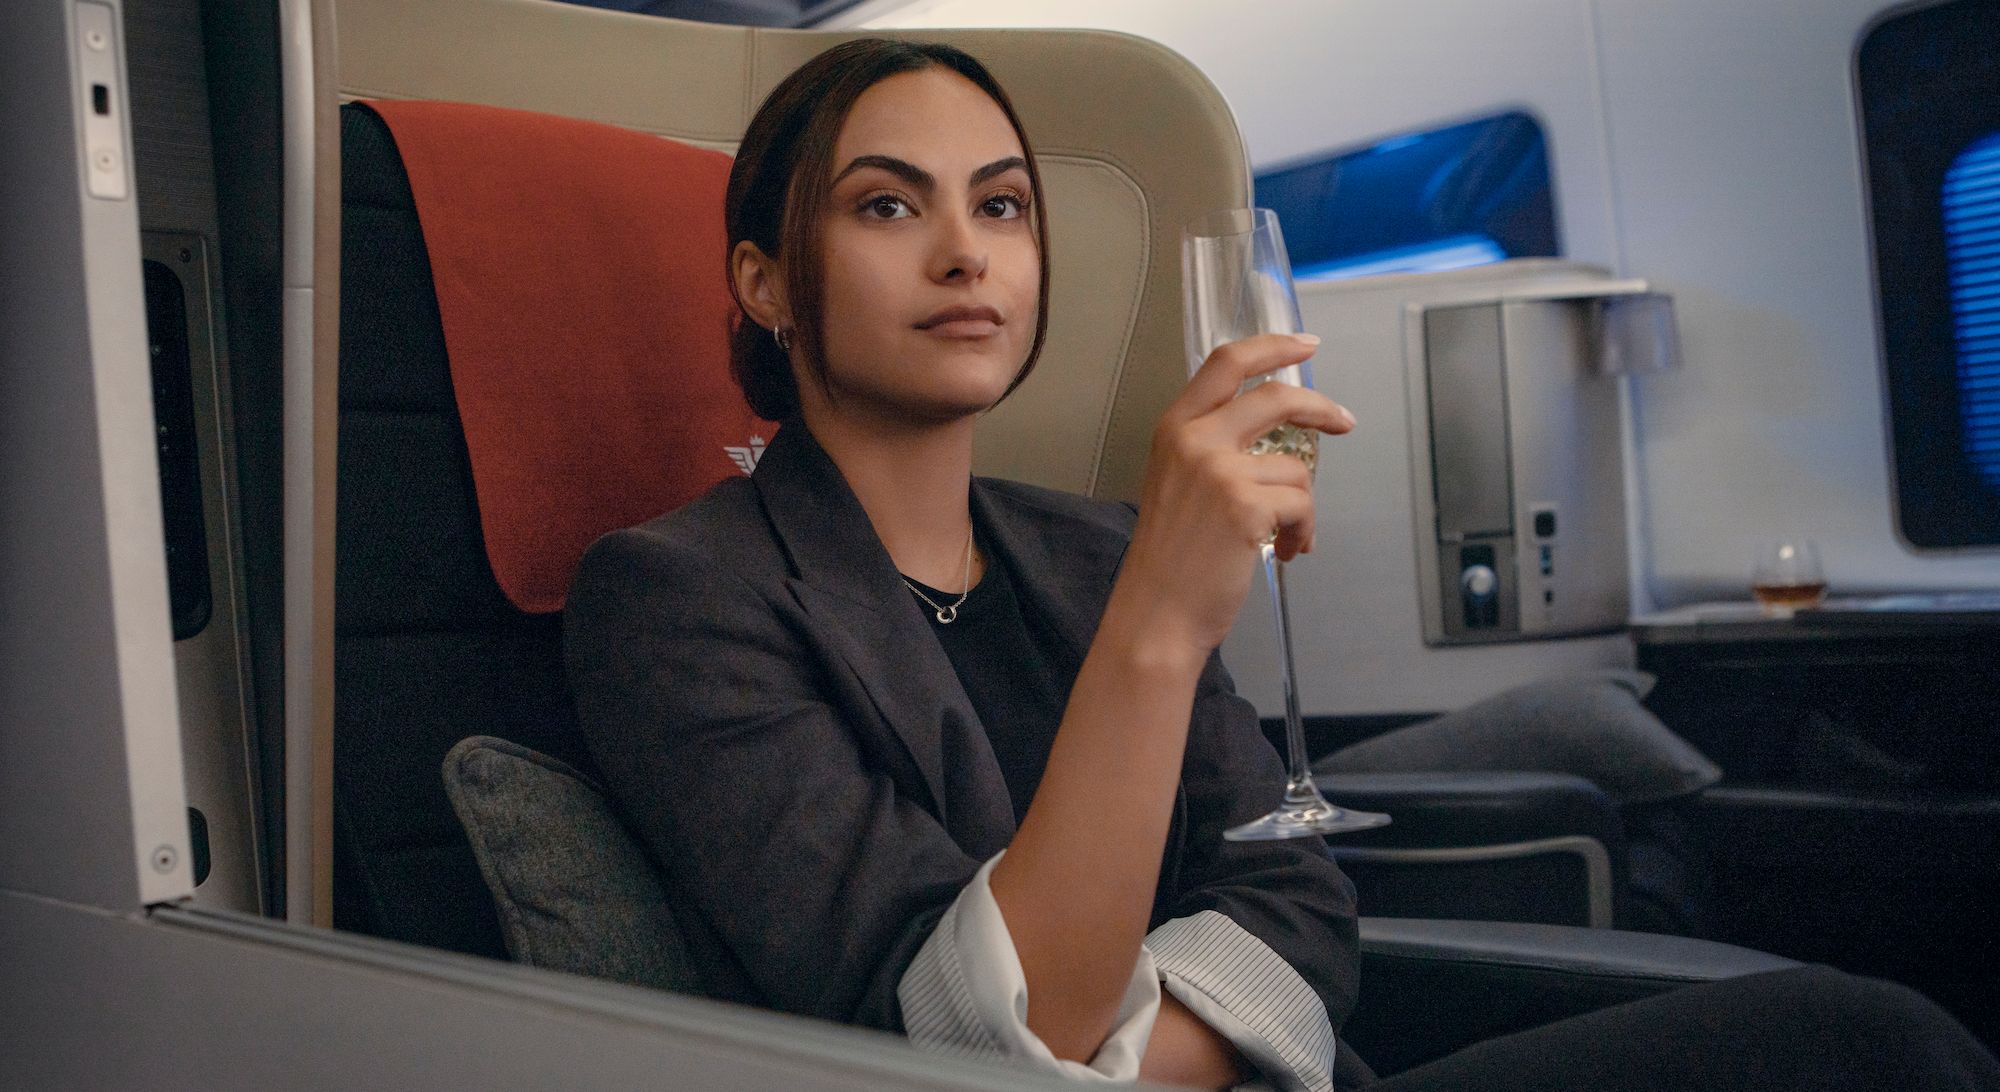 Ana (Camila Mendes) holds a glass of champagne on a plane in Upgraded